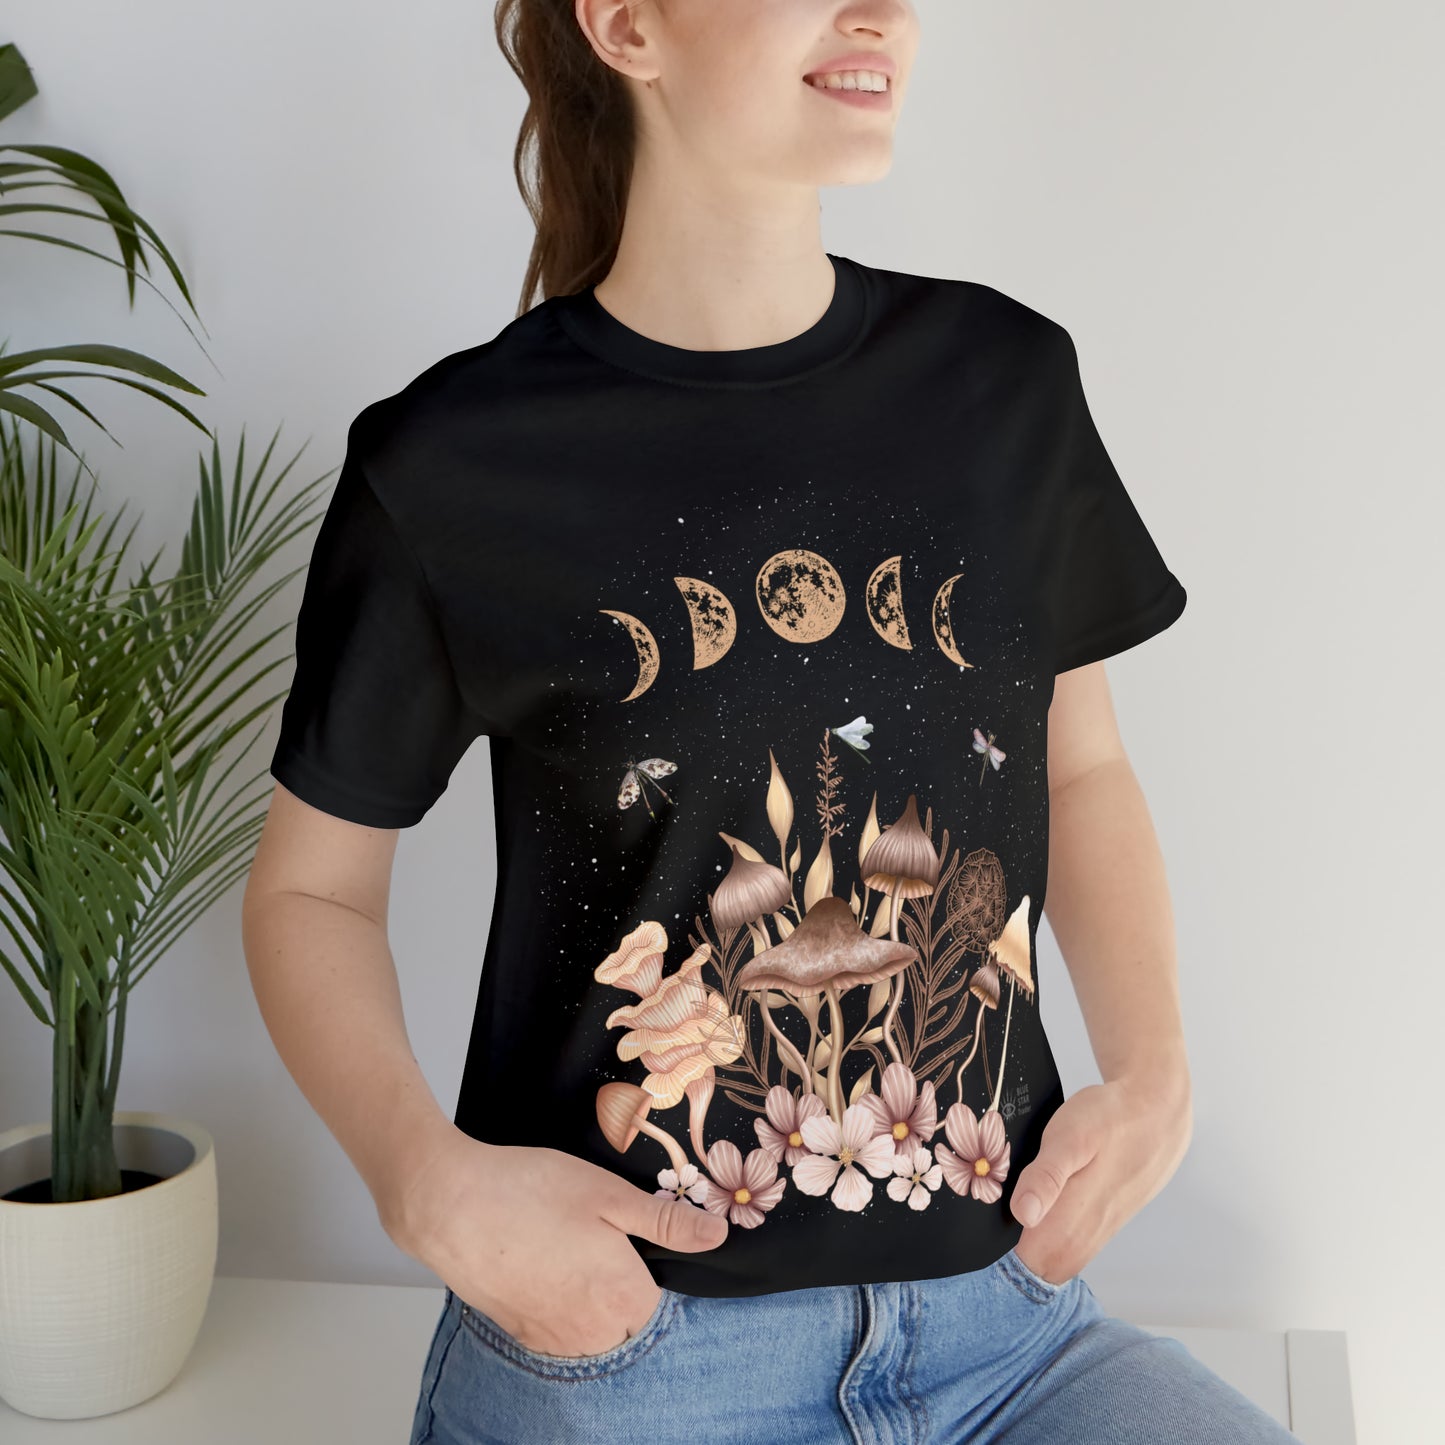 Elegant Mushrooms Black Tee, Witch Shirt, Unisex Jersey Short Sleeve Tee, Womens Bella Canvas T-Shirt, Wicca Clothing Clothes